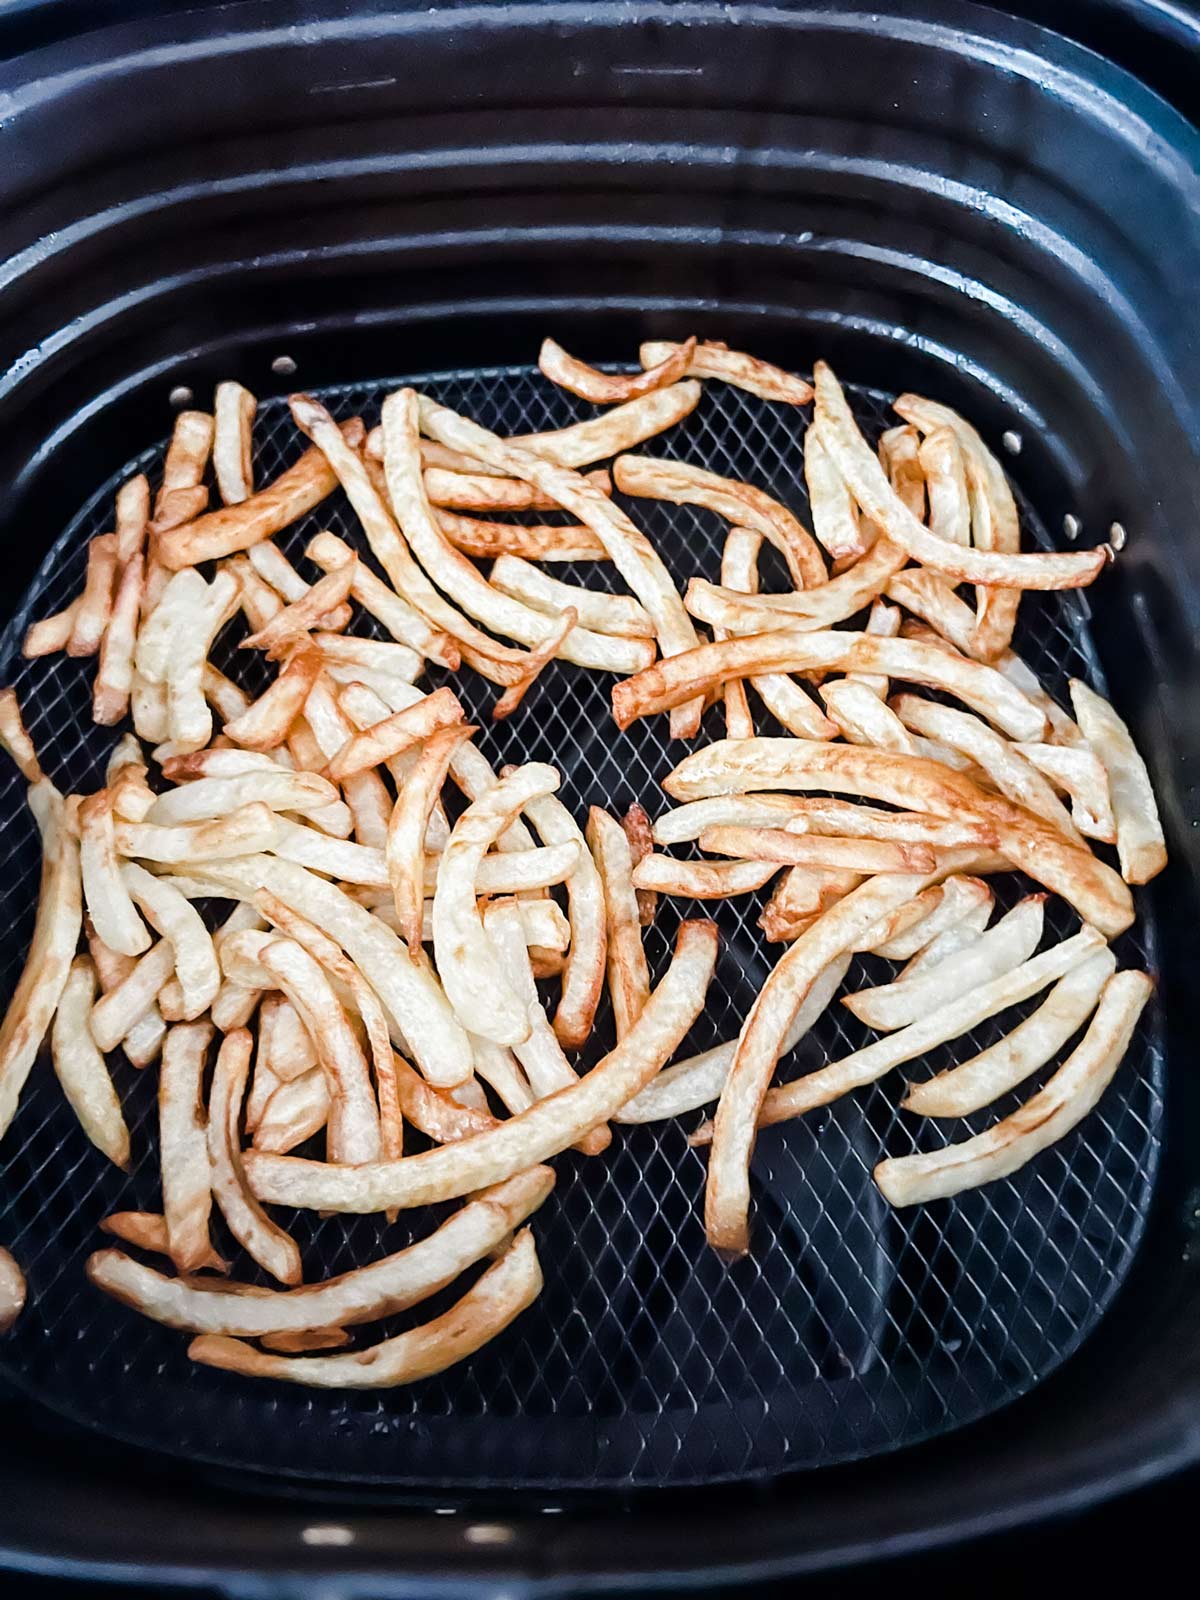 Partially cooked french fries in the basket of an air fryer.